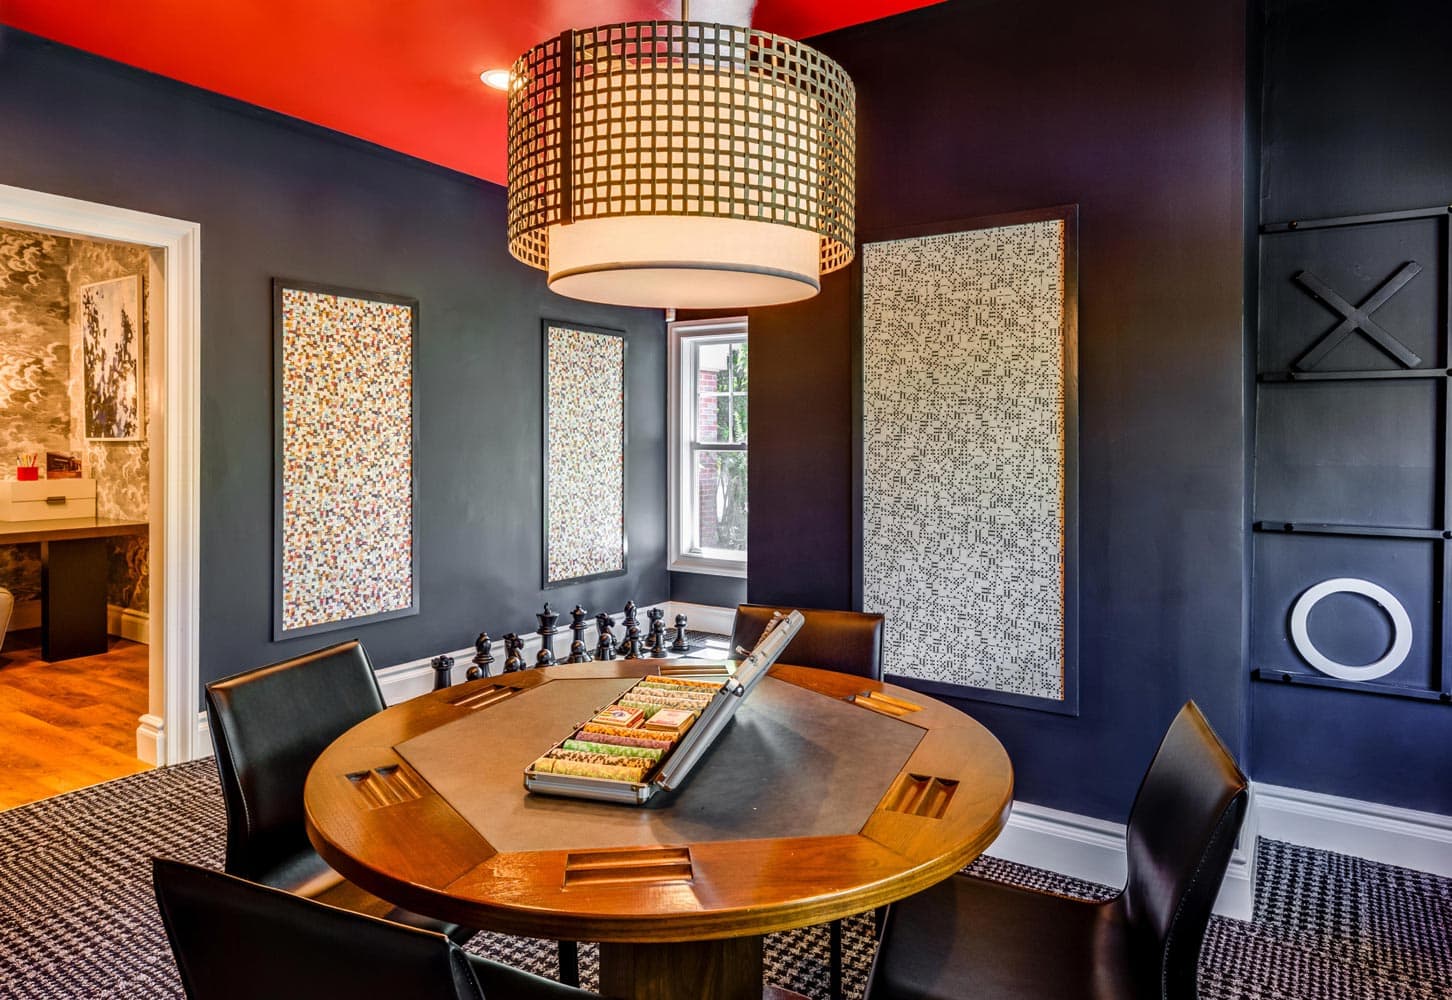 Essex residence game room interiors designed by Annette Jaffe Interiors